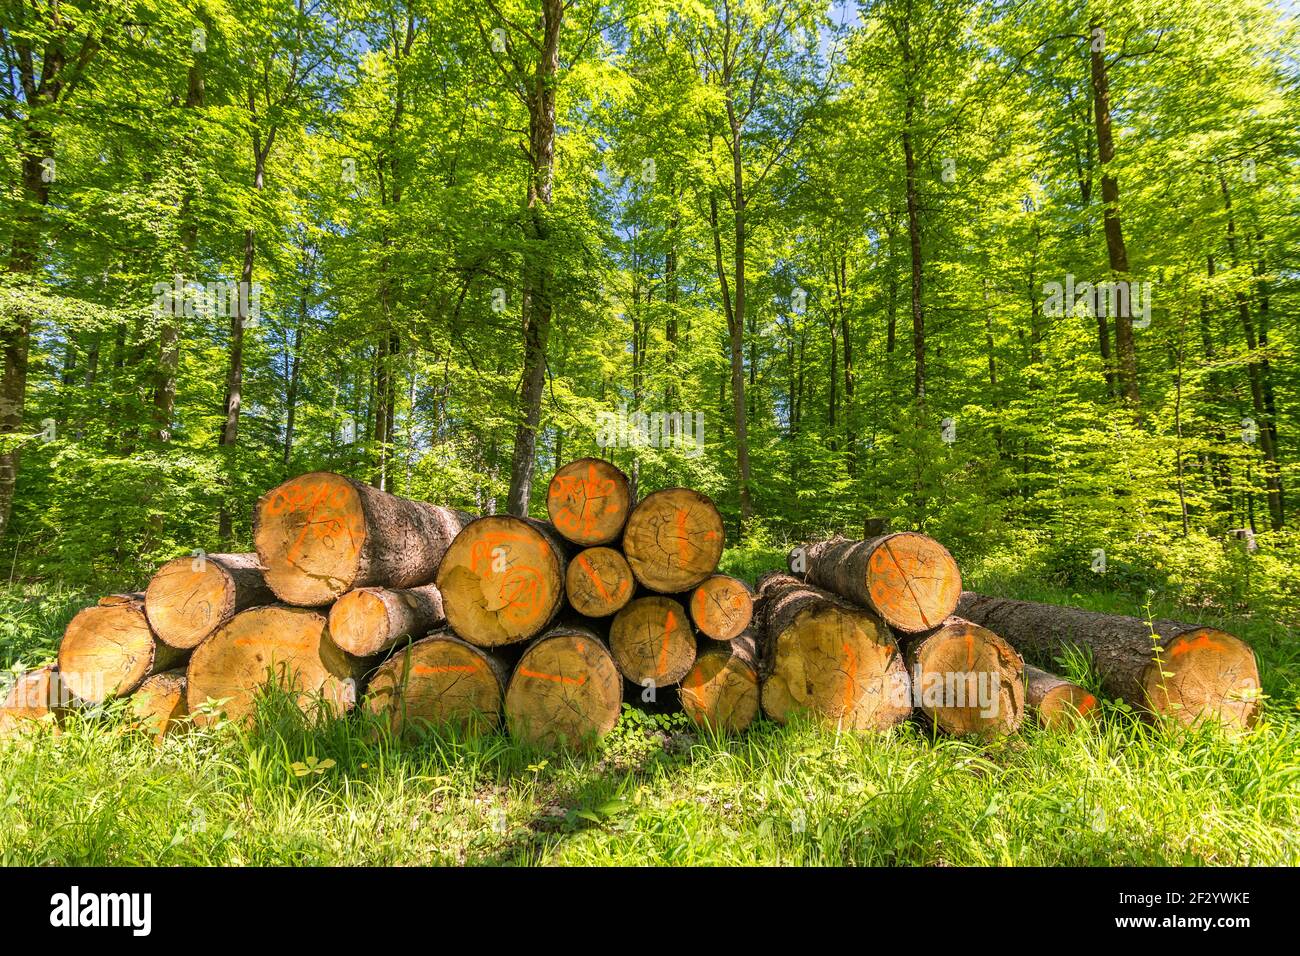 Pile of freshly cut logs in the forest in spring with green foliage Stock Photo